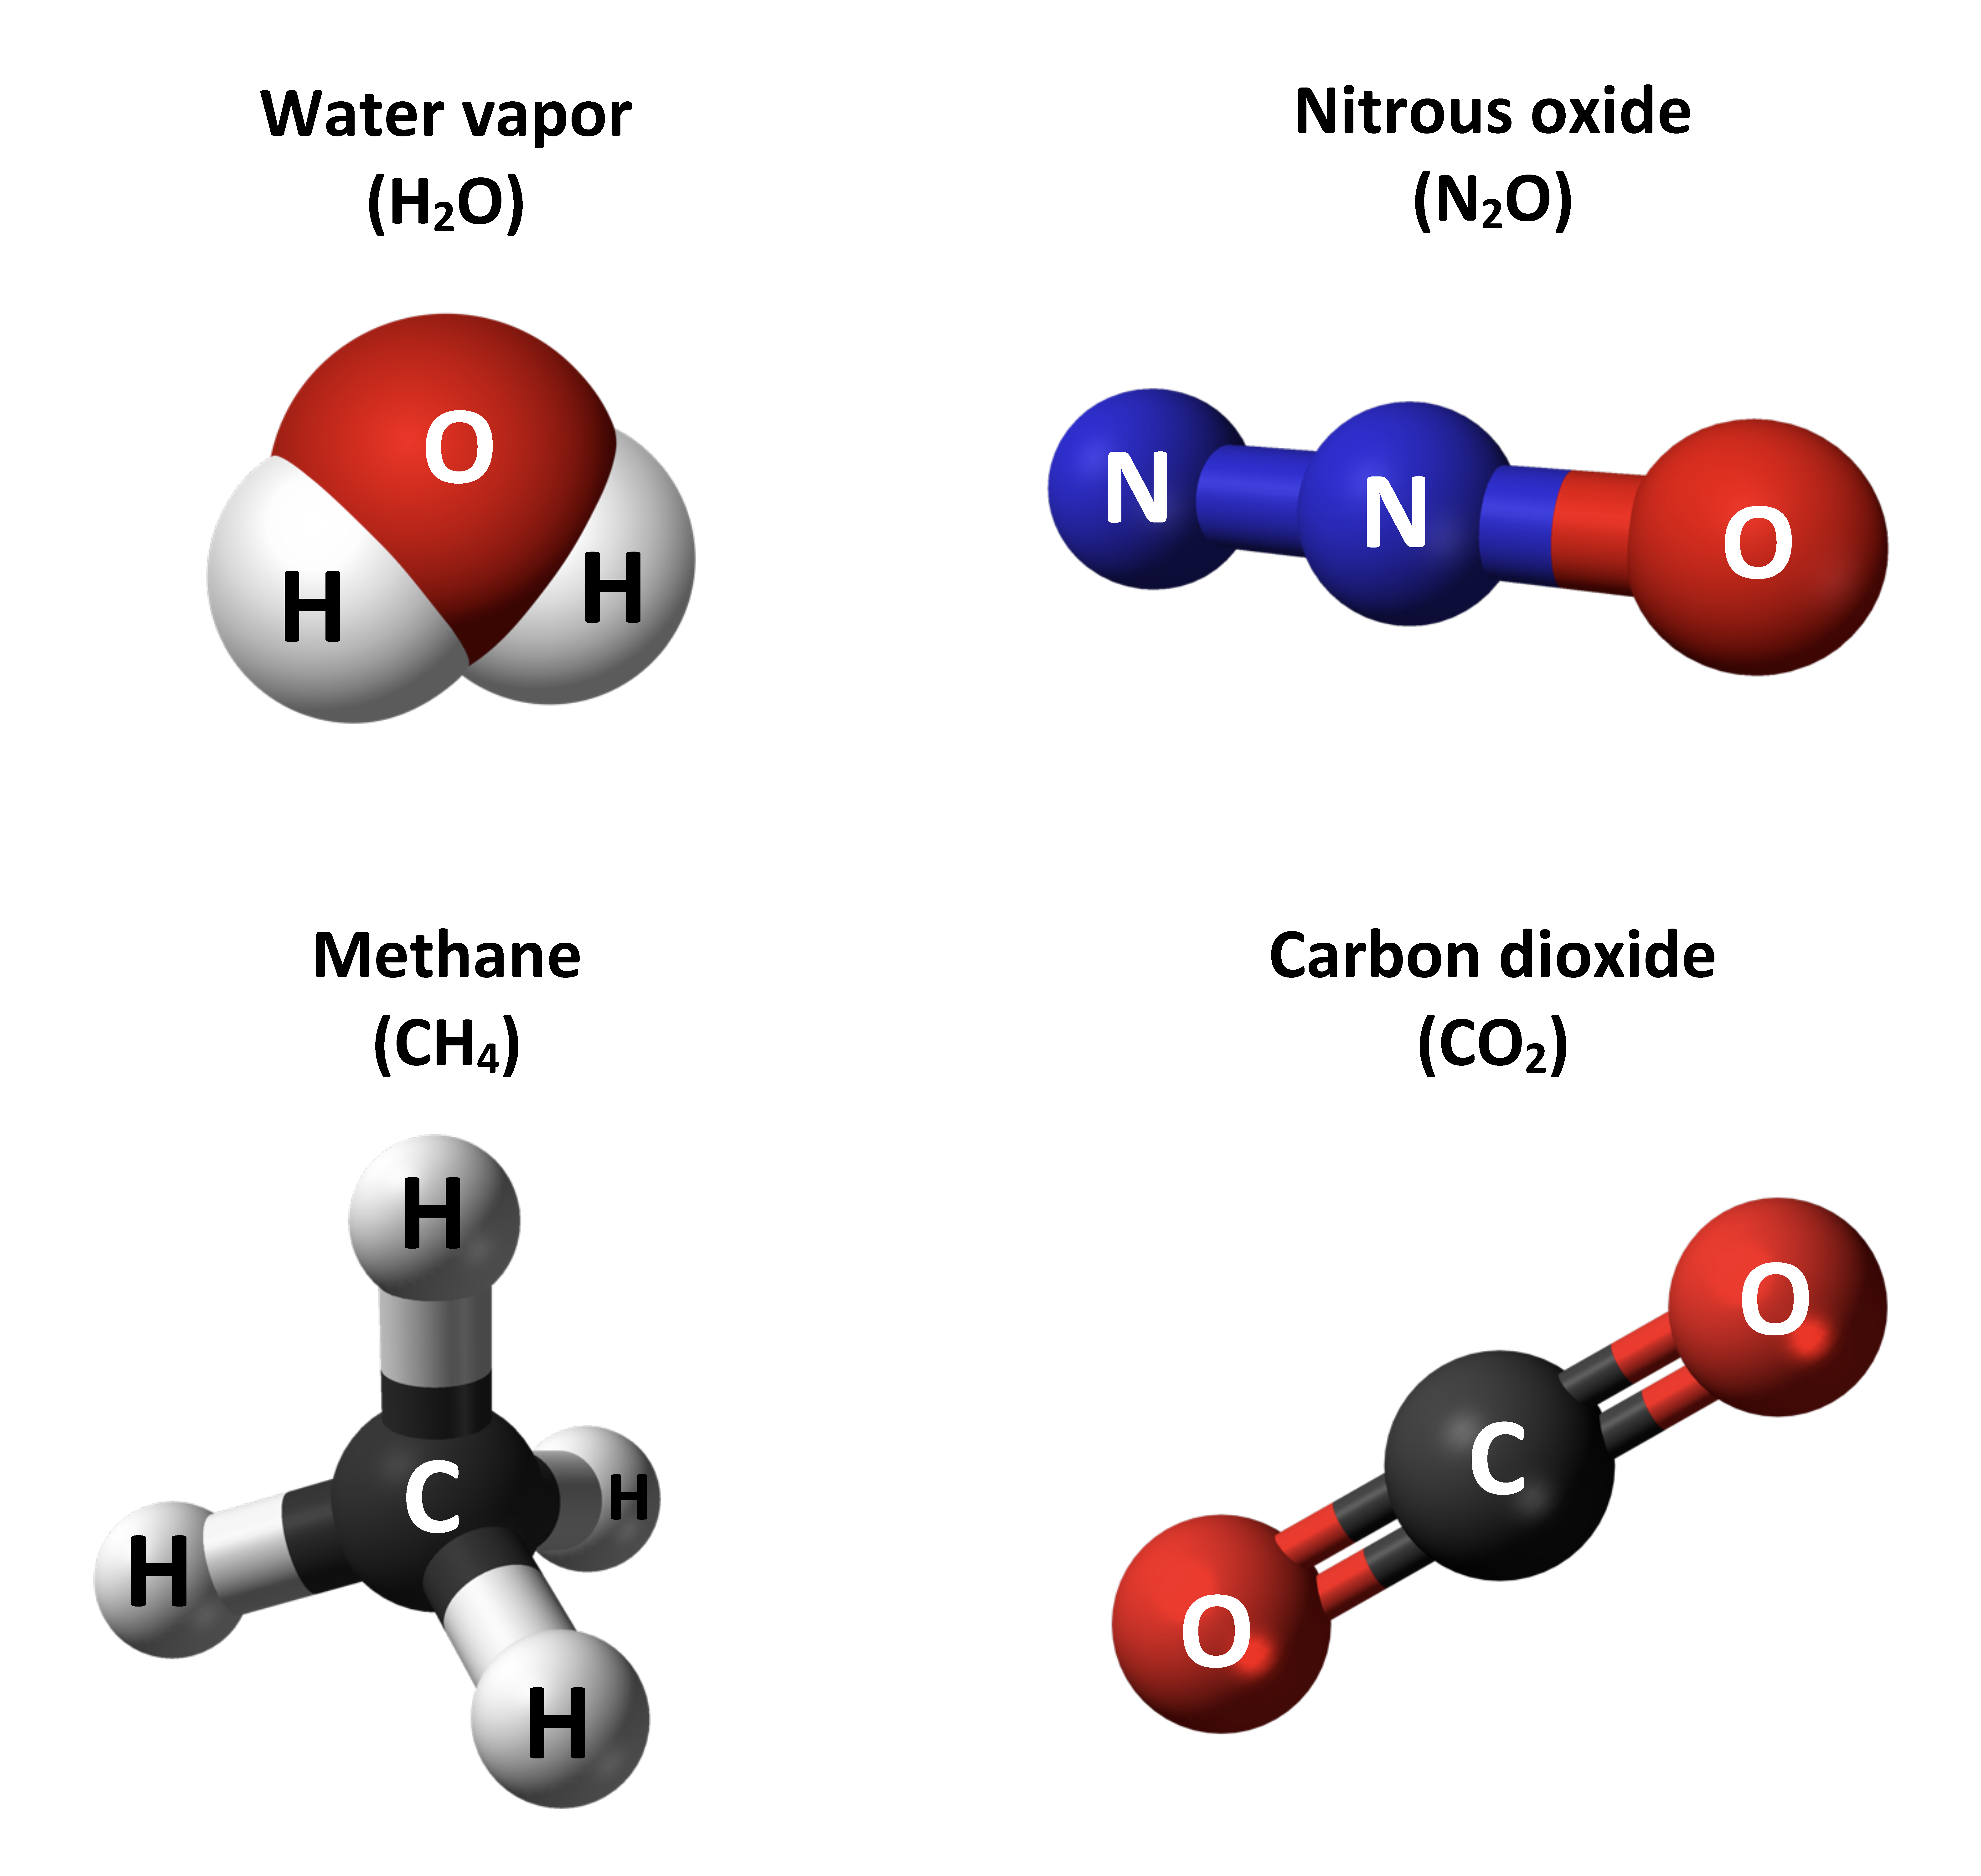 Four diagrams showing various greenhouse gas molecules: water vapor consists of a red oxygen atom with two white hydrogen atoms attached on the bottom left and bottom right; nitrous oxide consists of two blue nitrogen atoms and a red oxygen atom connected in a straight line; methane consists of a black carbon atom at the center with four white hydrogen atoms connected to the carbon atom in a pyramidal shape; and carbon dioxide consists of a red oxygen atom, a black carbon atom, and another red oxygen atom connected in a straight line.